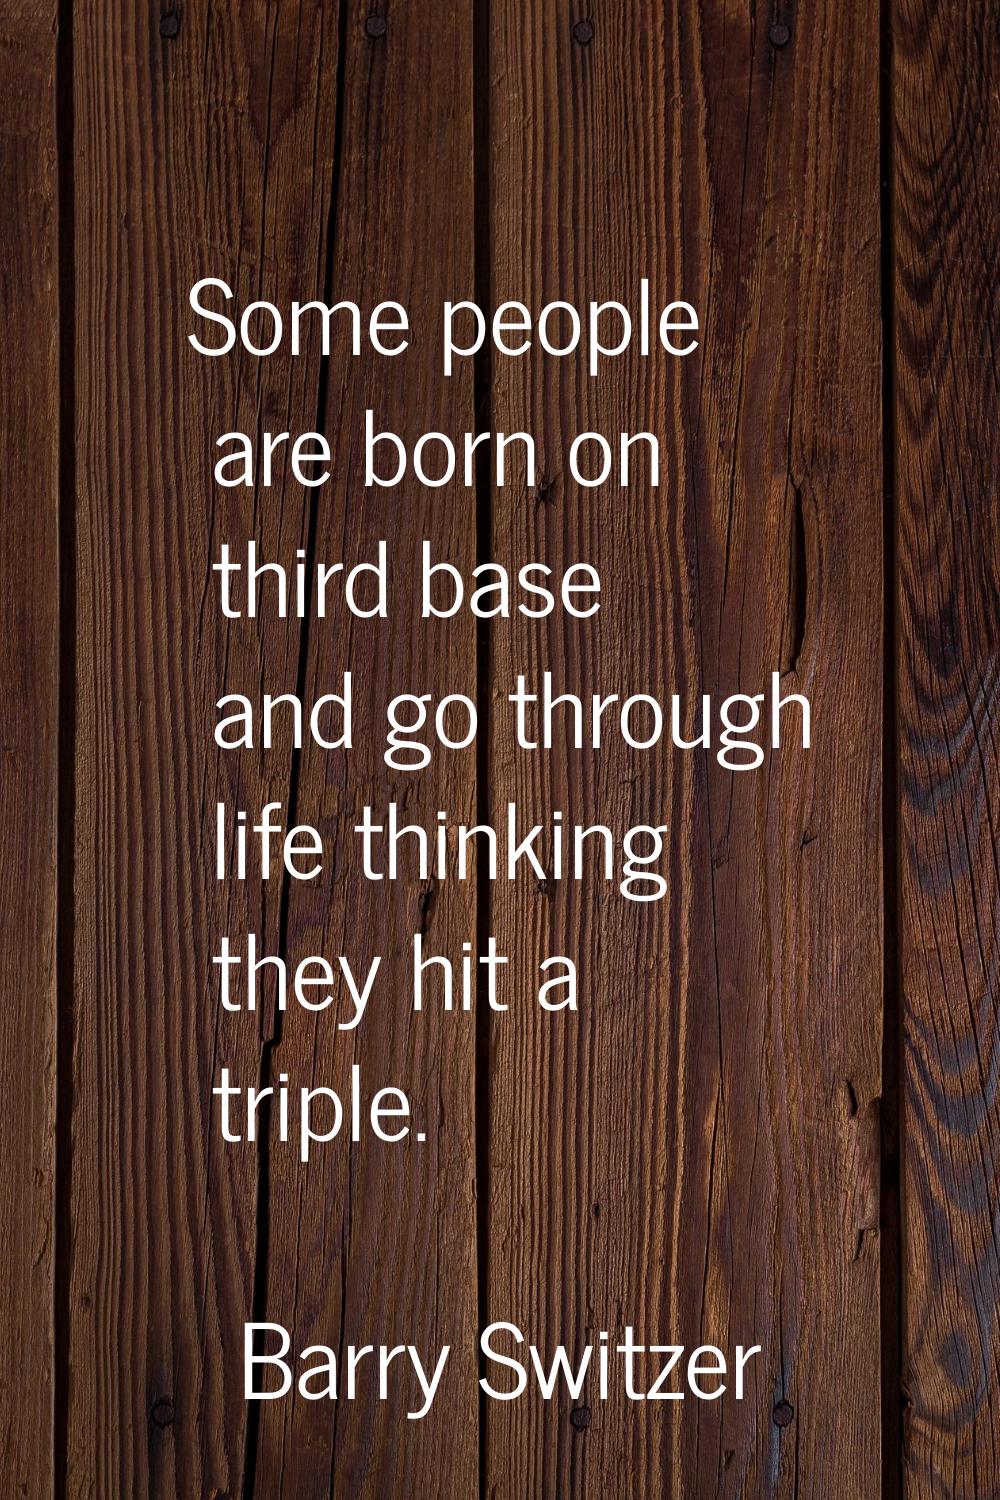 Some people are born on third base and go through life thinking they hit a triple.